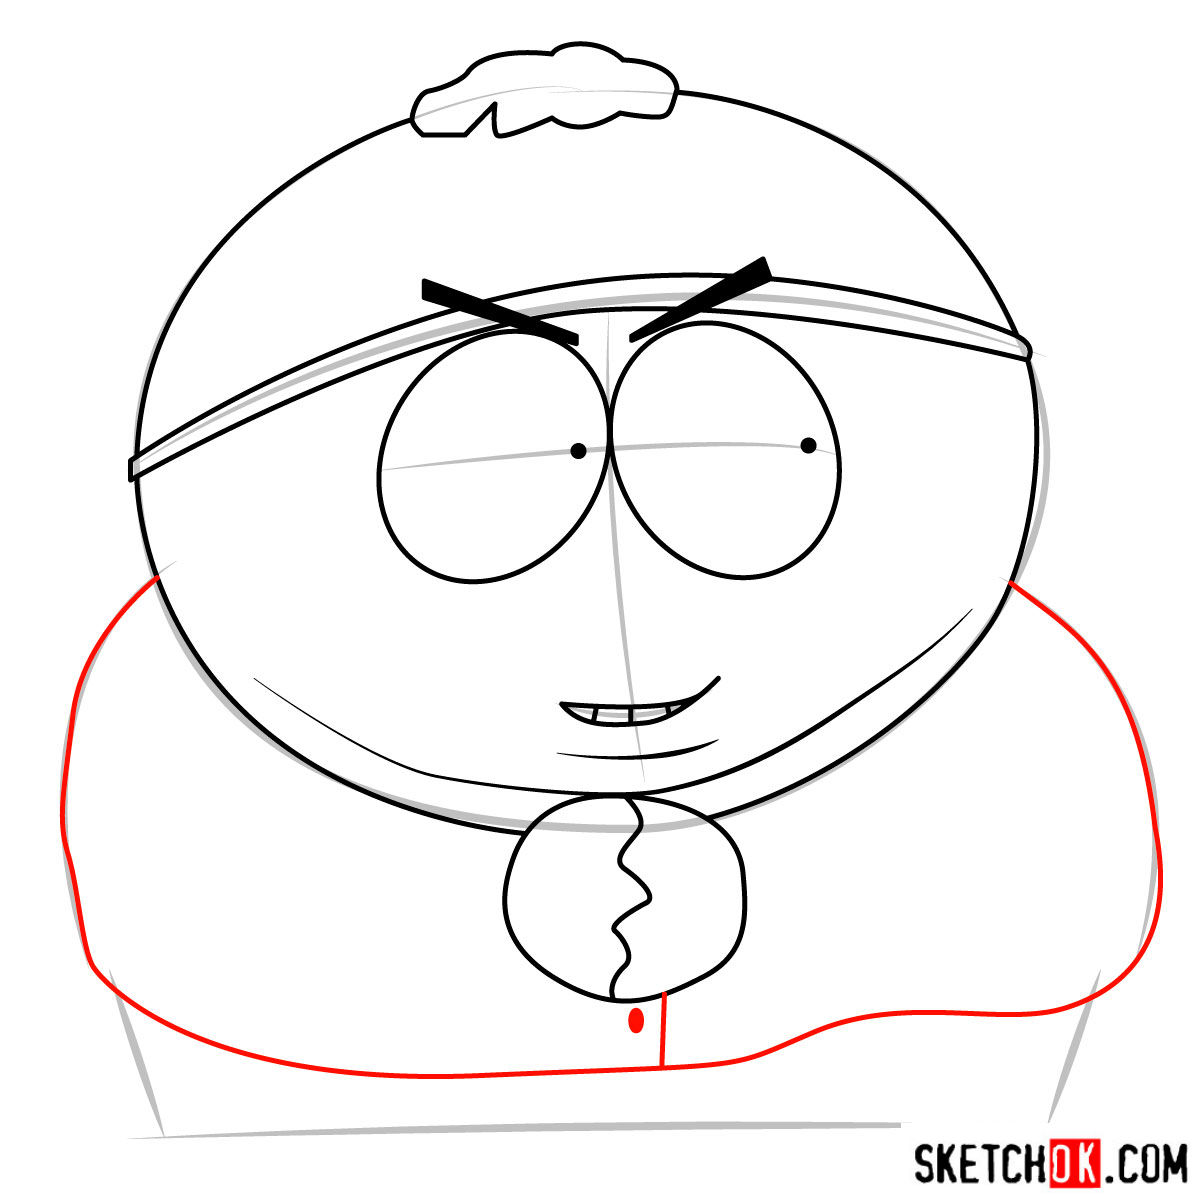 How to draw tricky Cartman from South Park - step 05